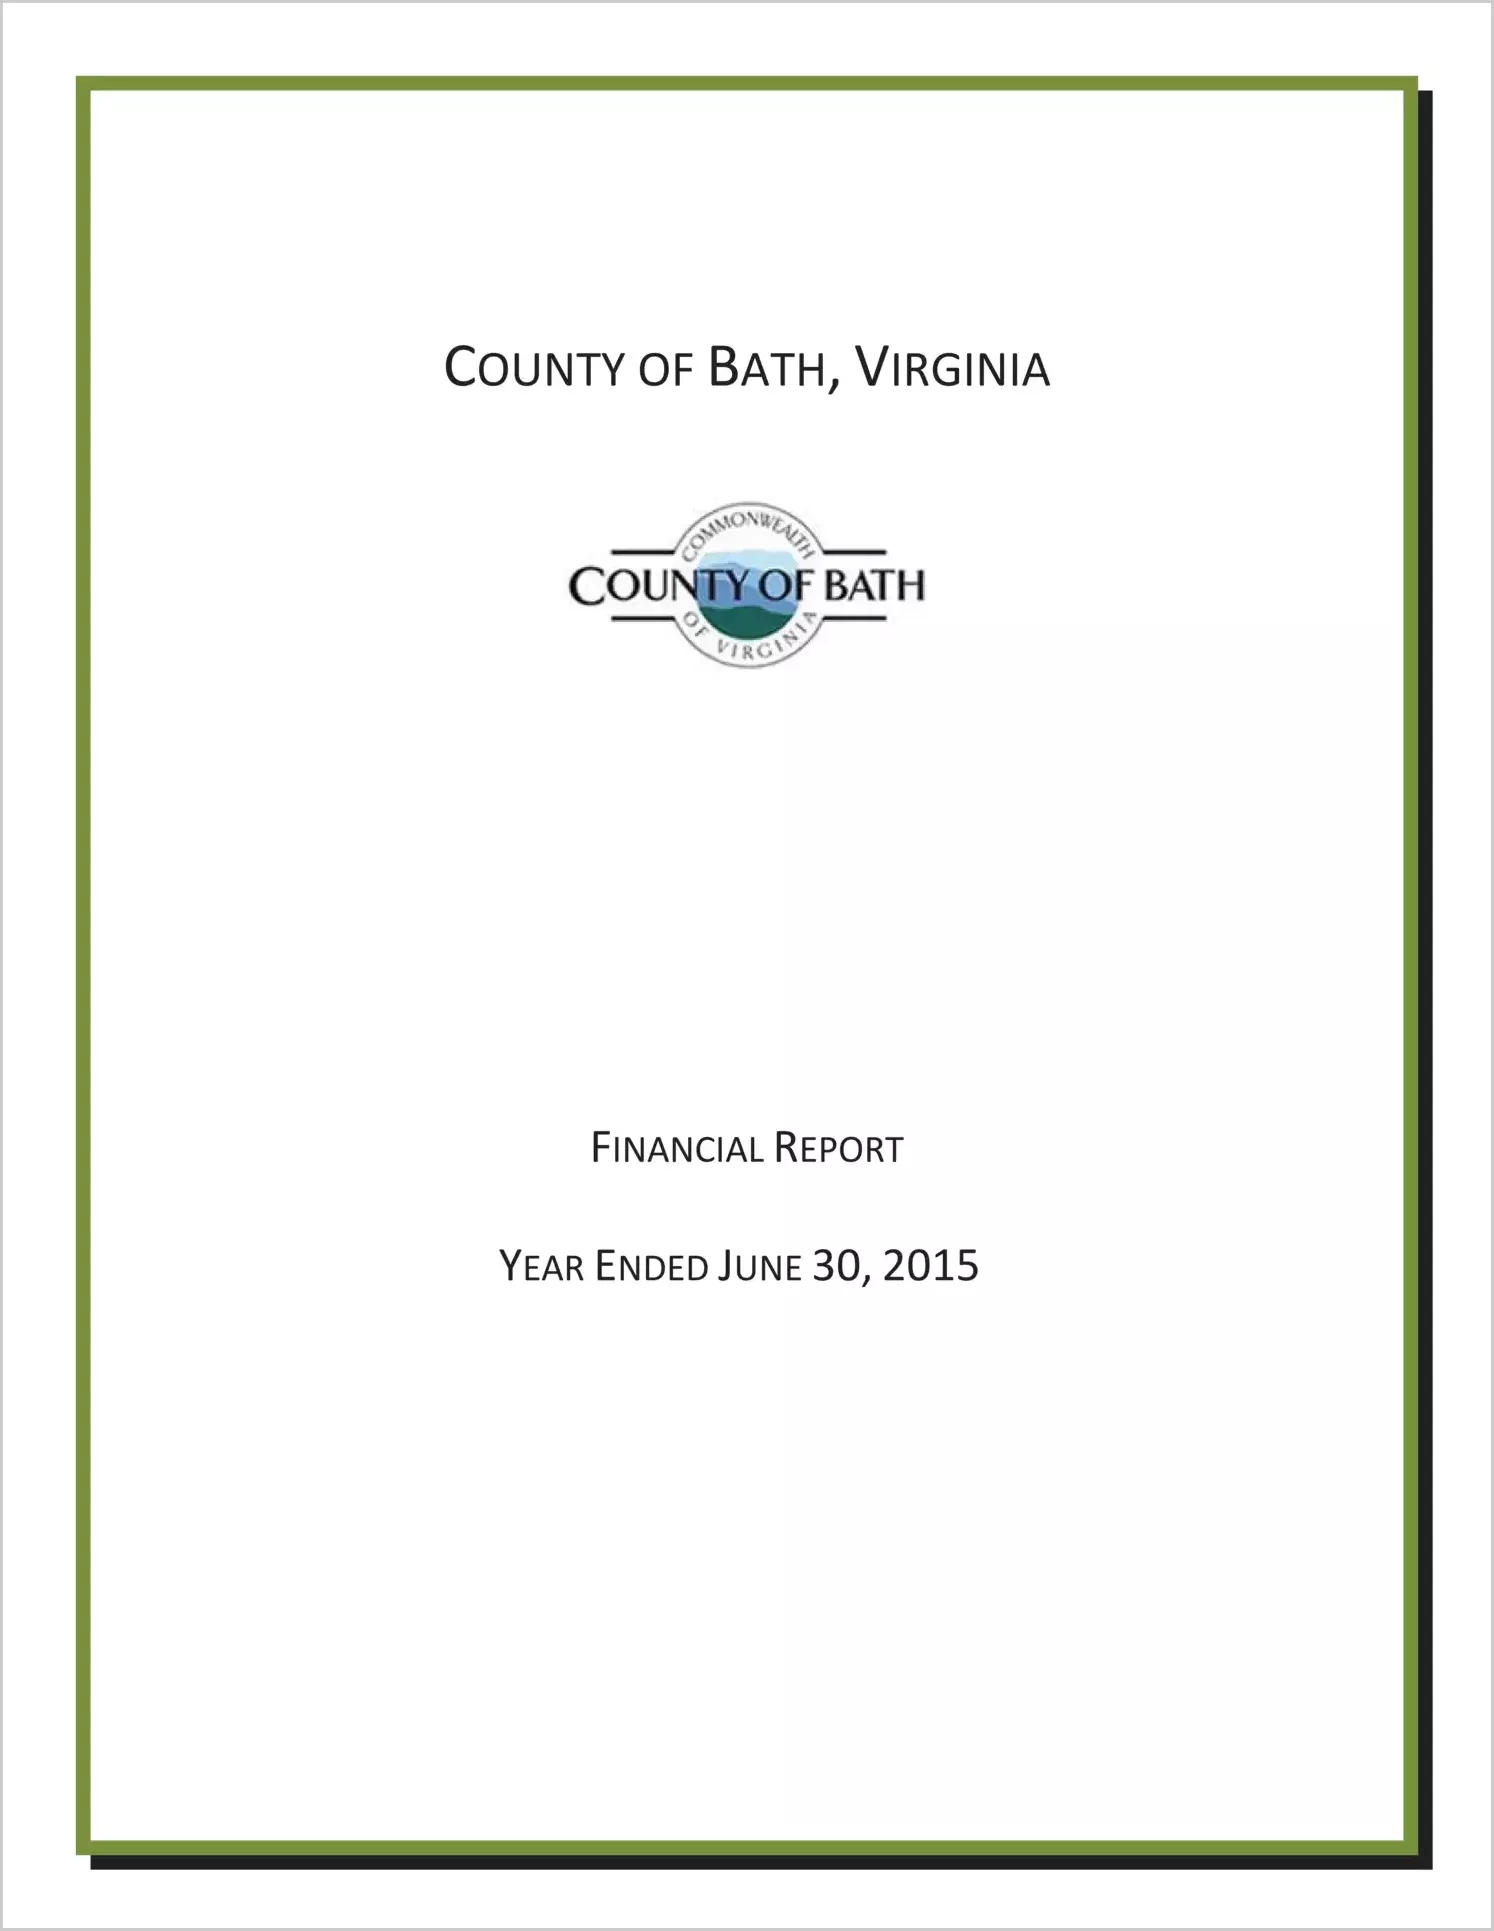 2015 Annual Financial Report for County of Bath